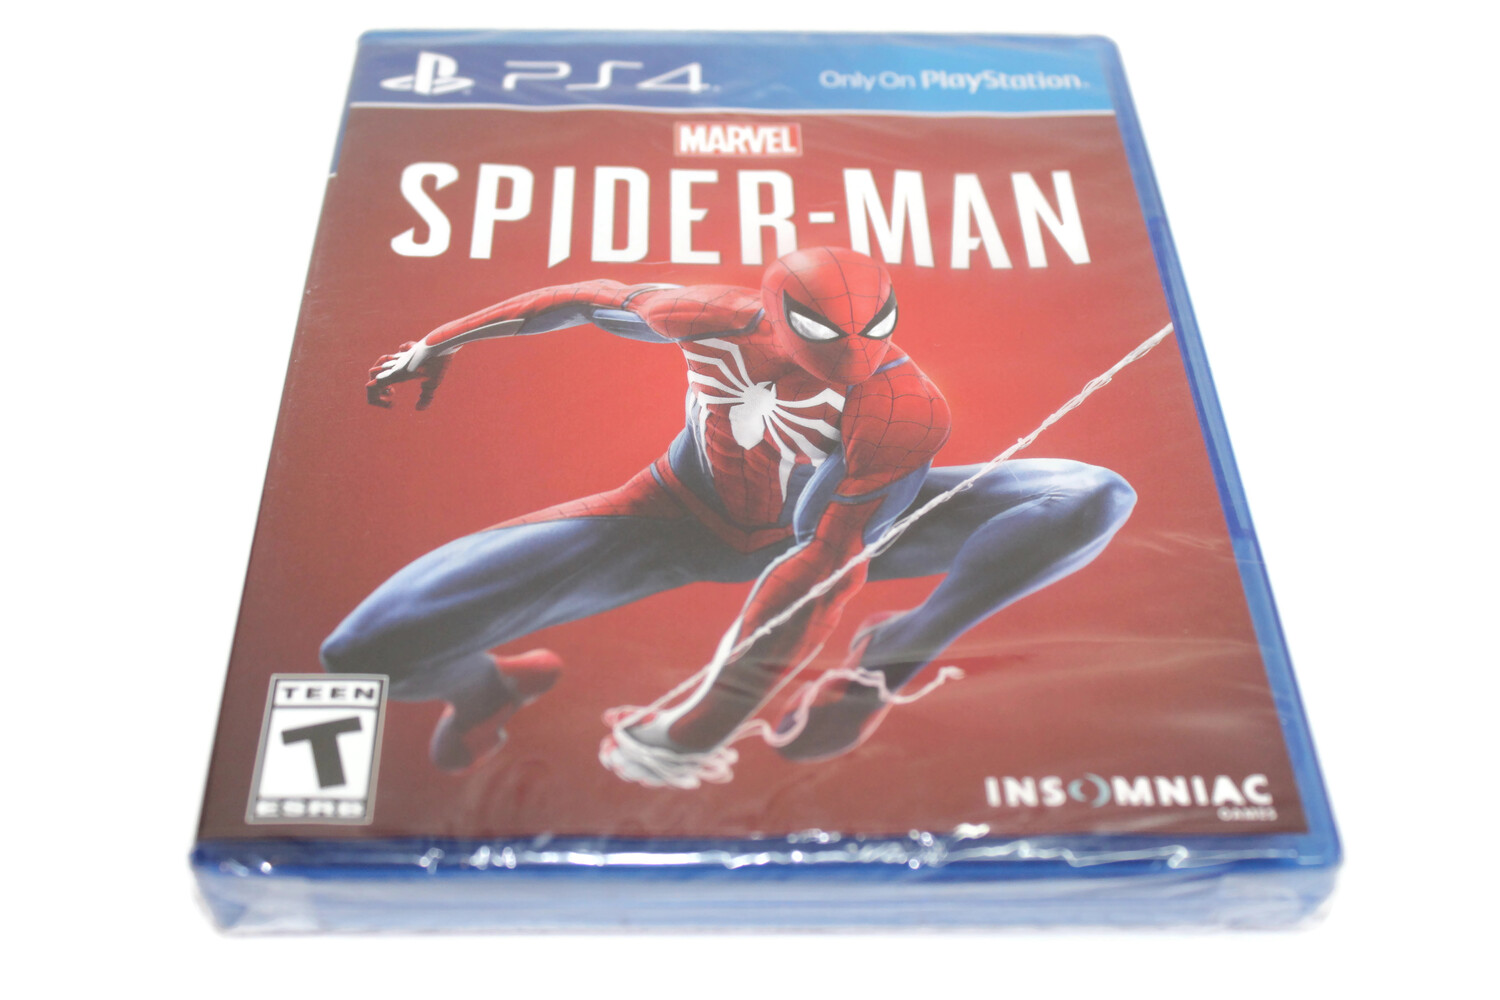 Spiderman Marvel PlayStation 4 Game New USA Pawn